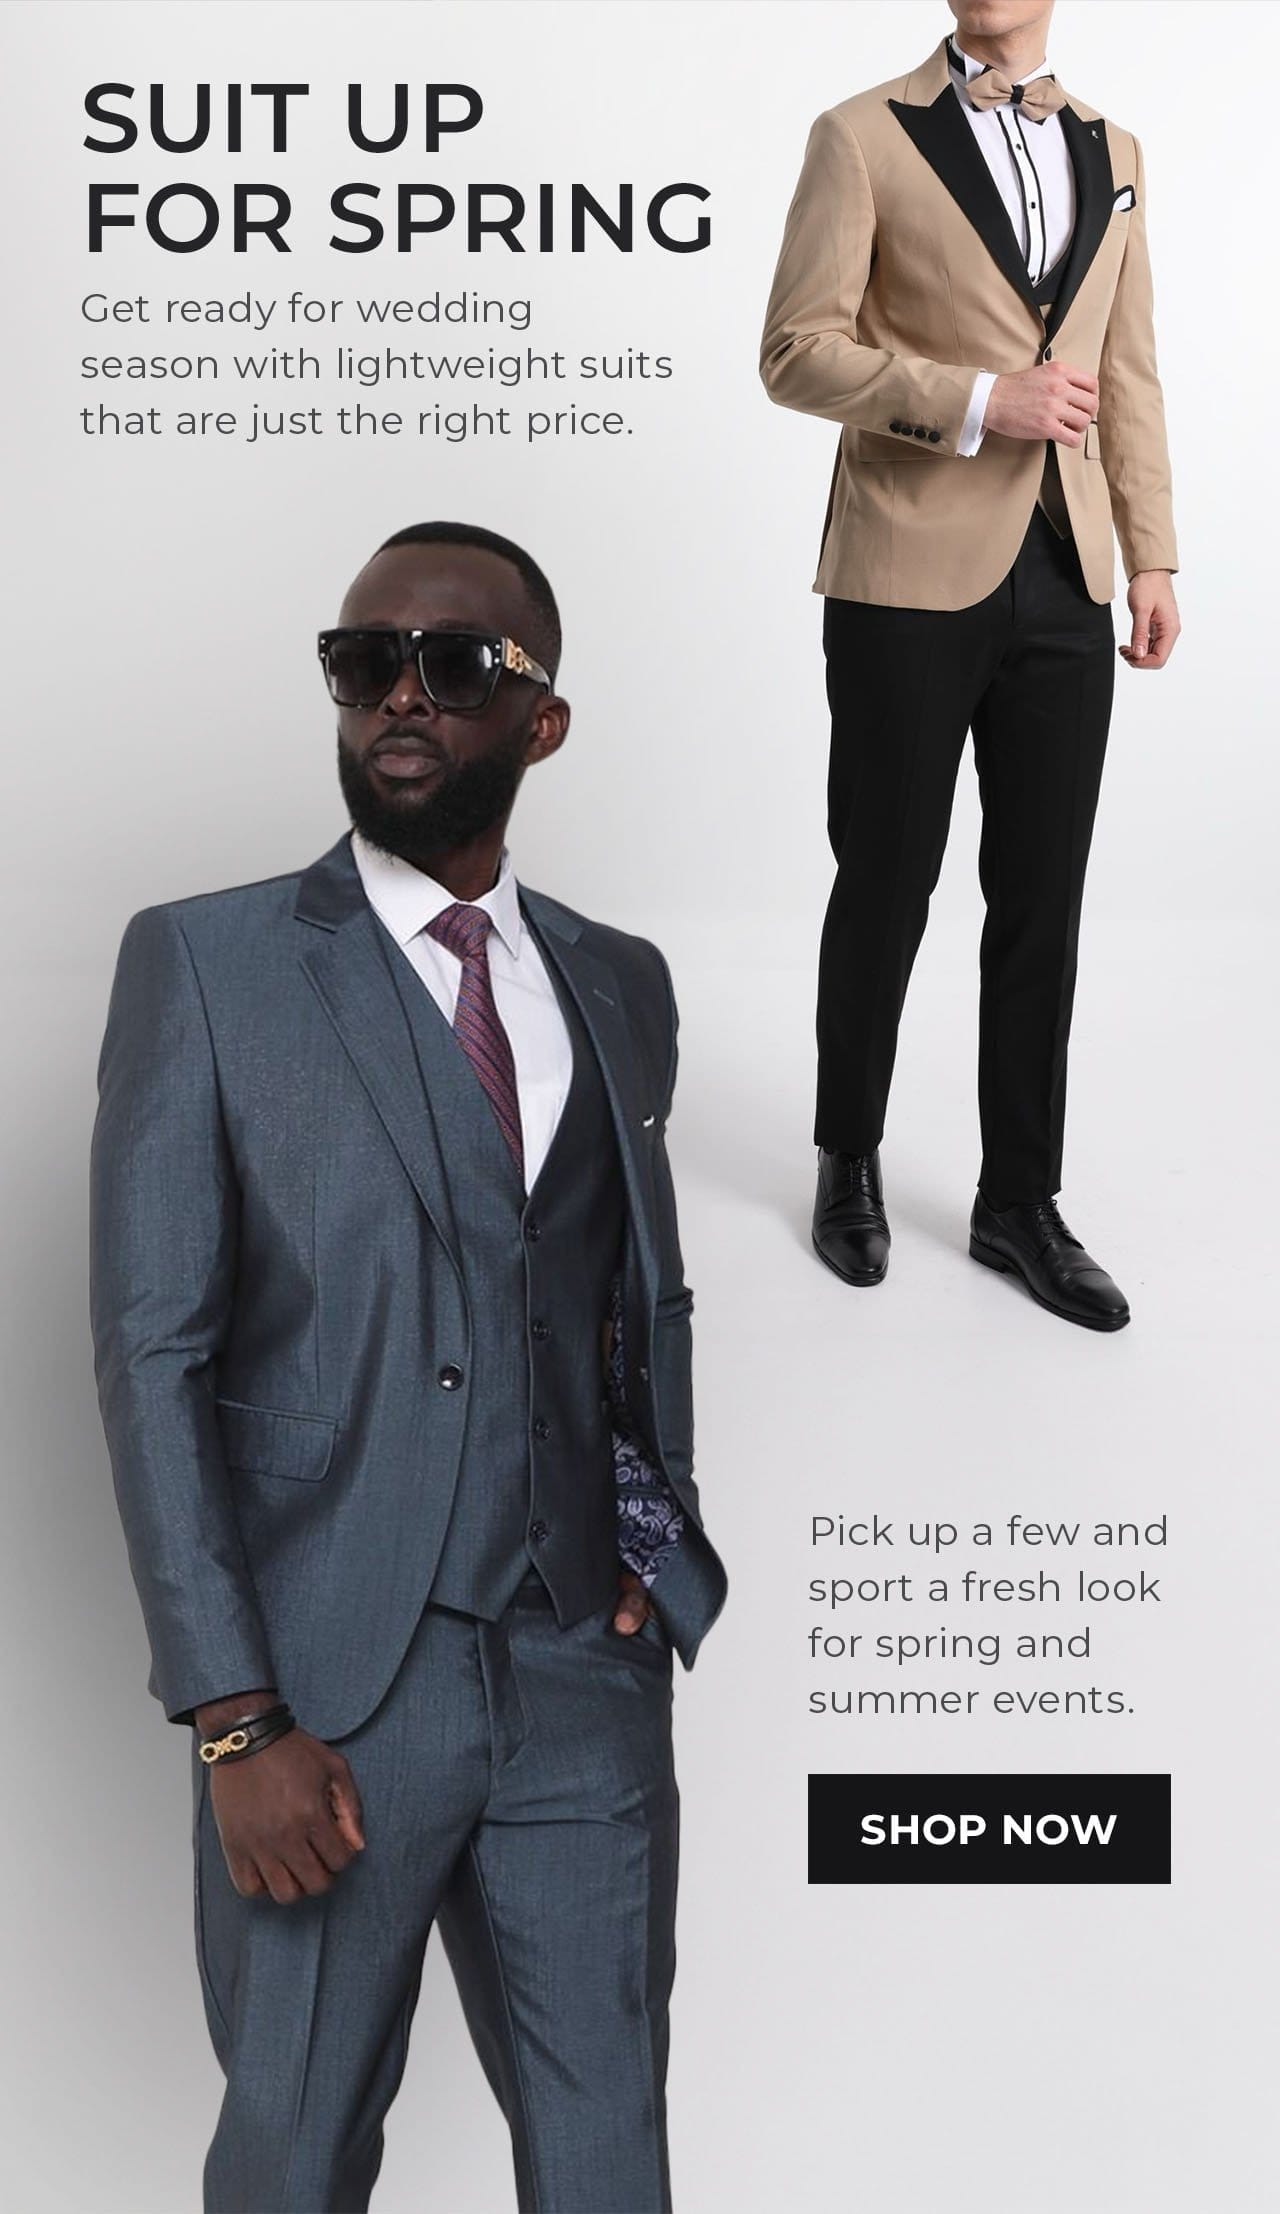 Suit Up for Spring | SHOP NOW